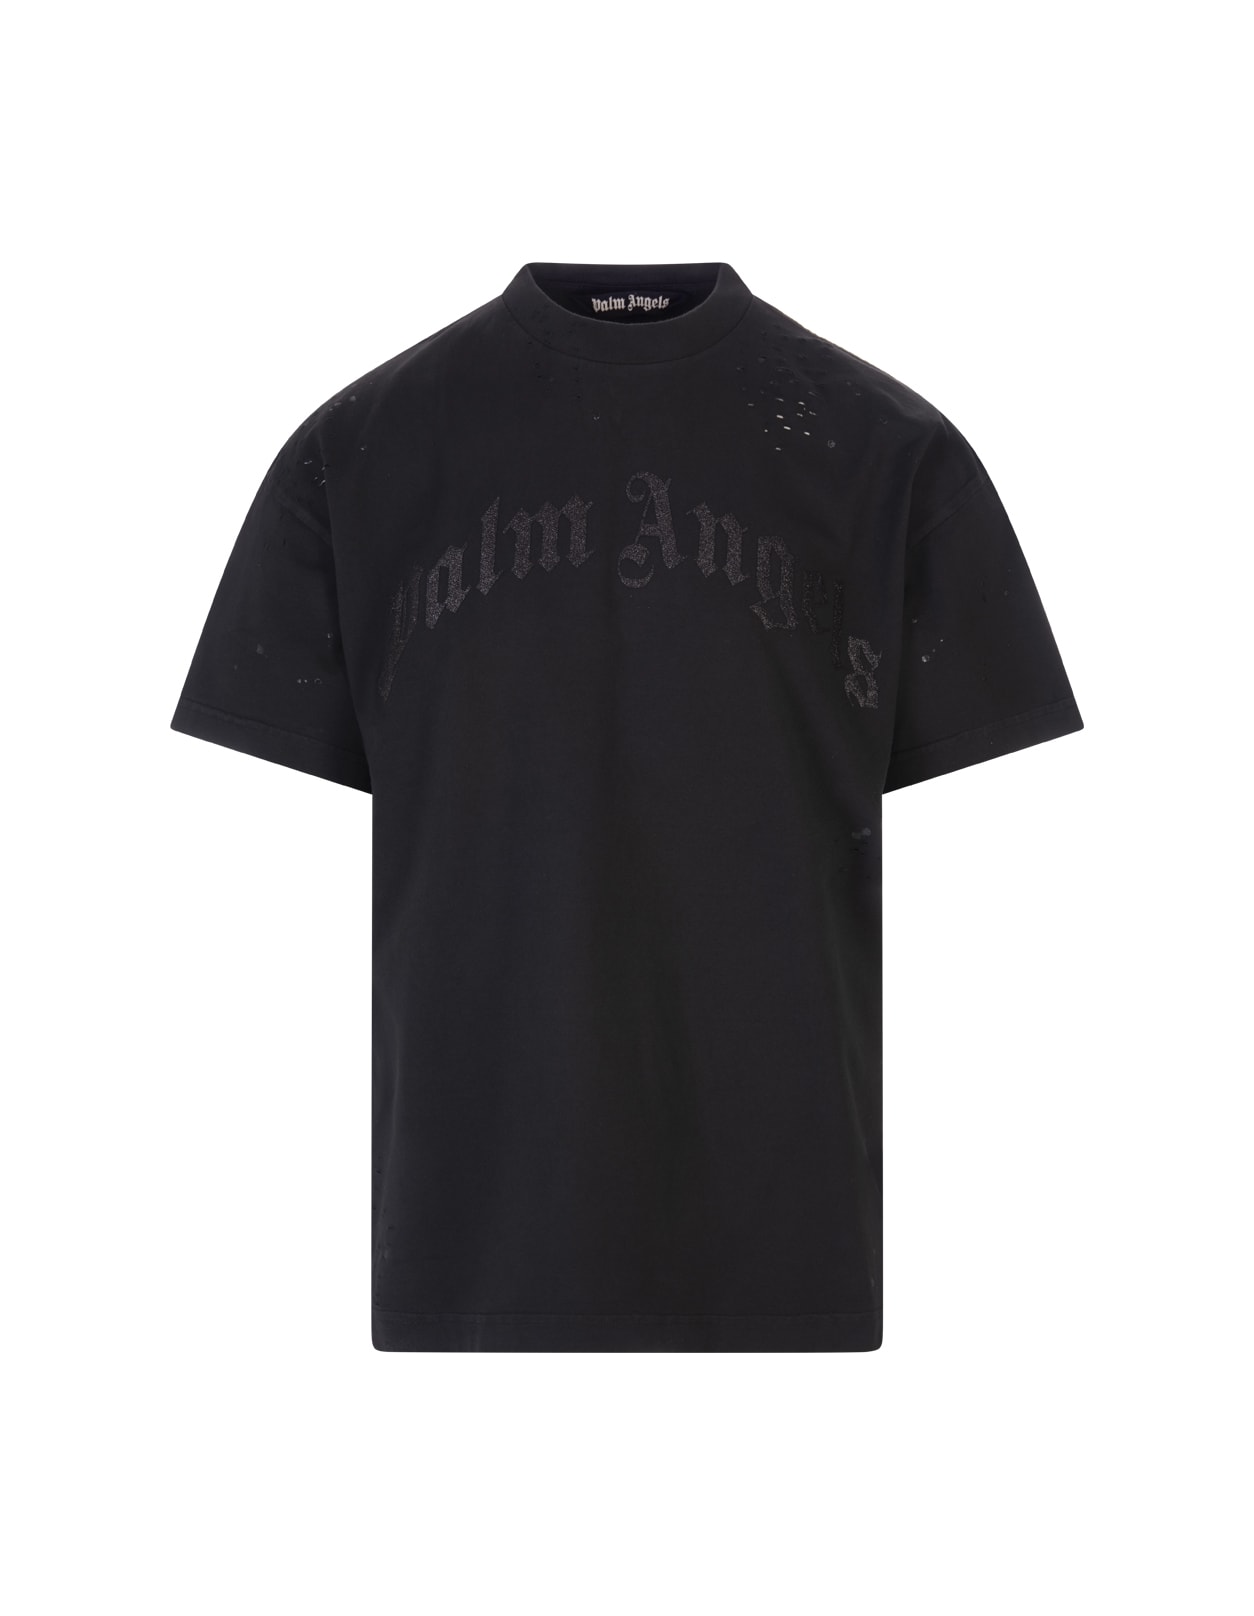 Palm Angels Man Black T-shirt With Distressed Details And Black Glitter Logo